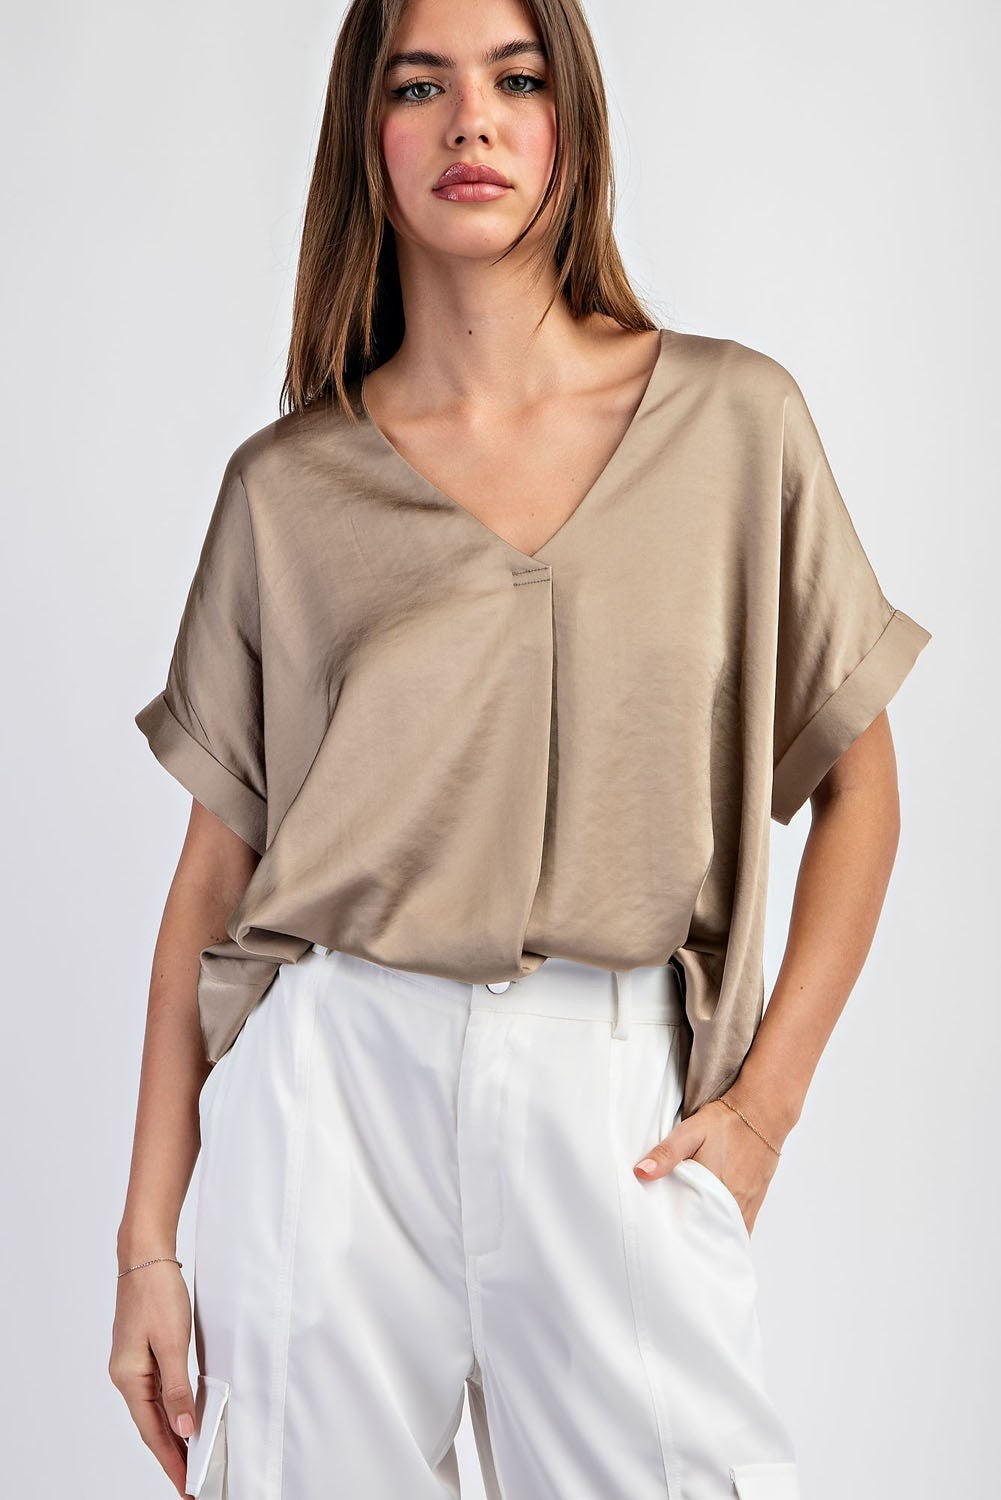 The Fiona Blouse